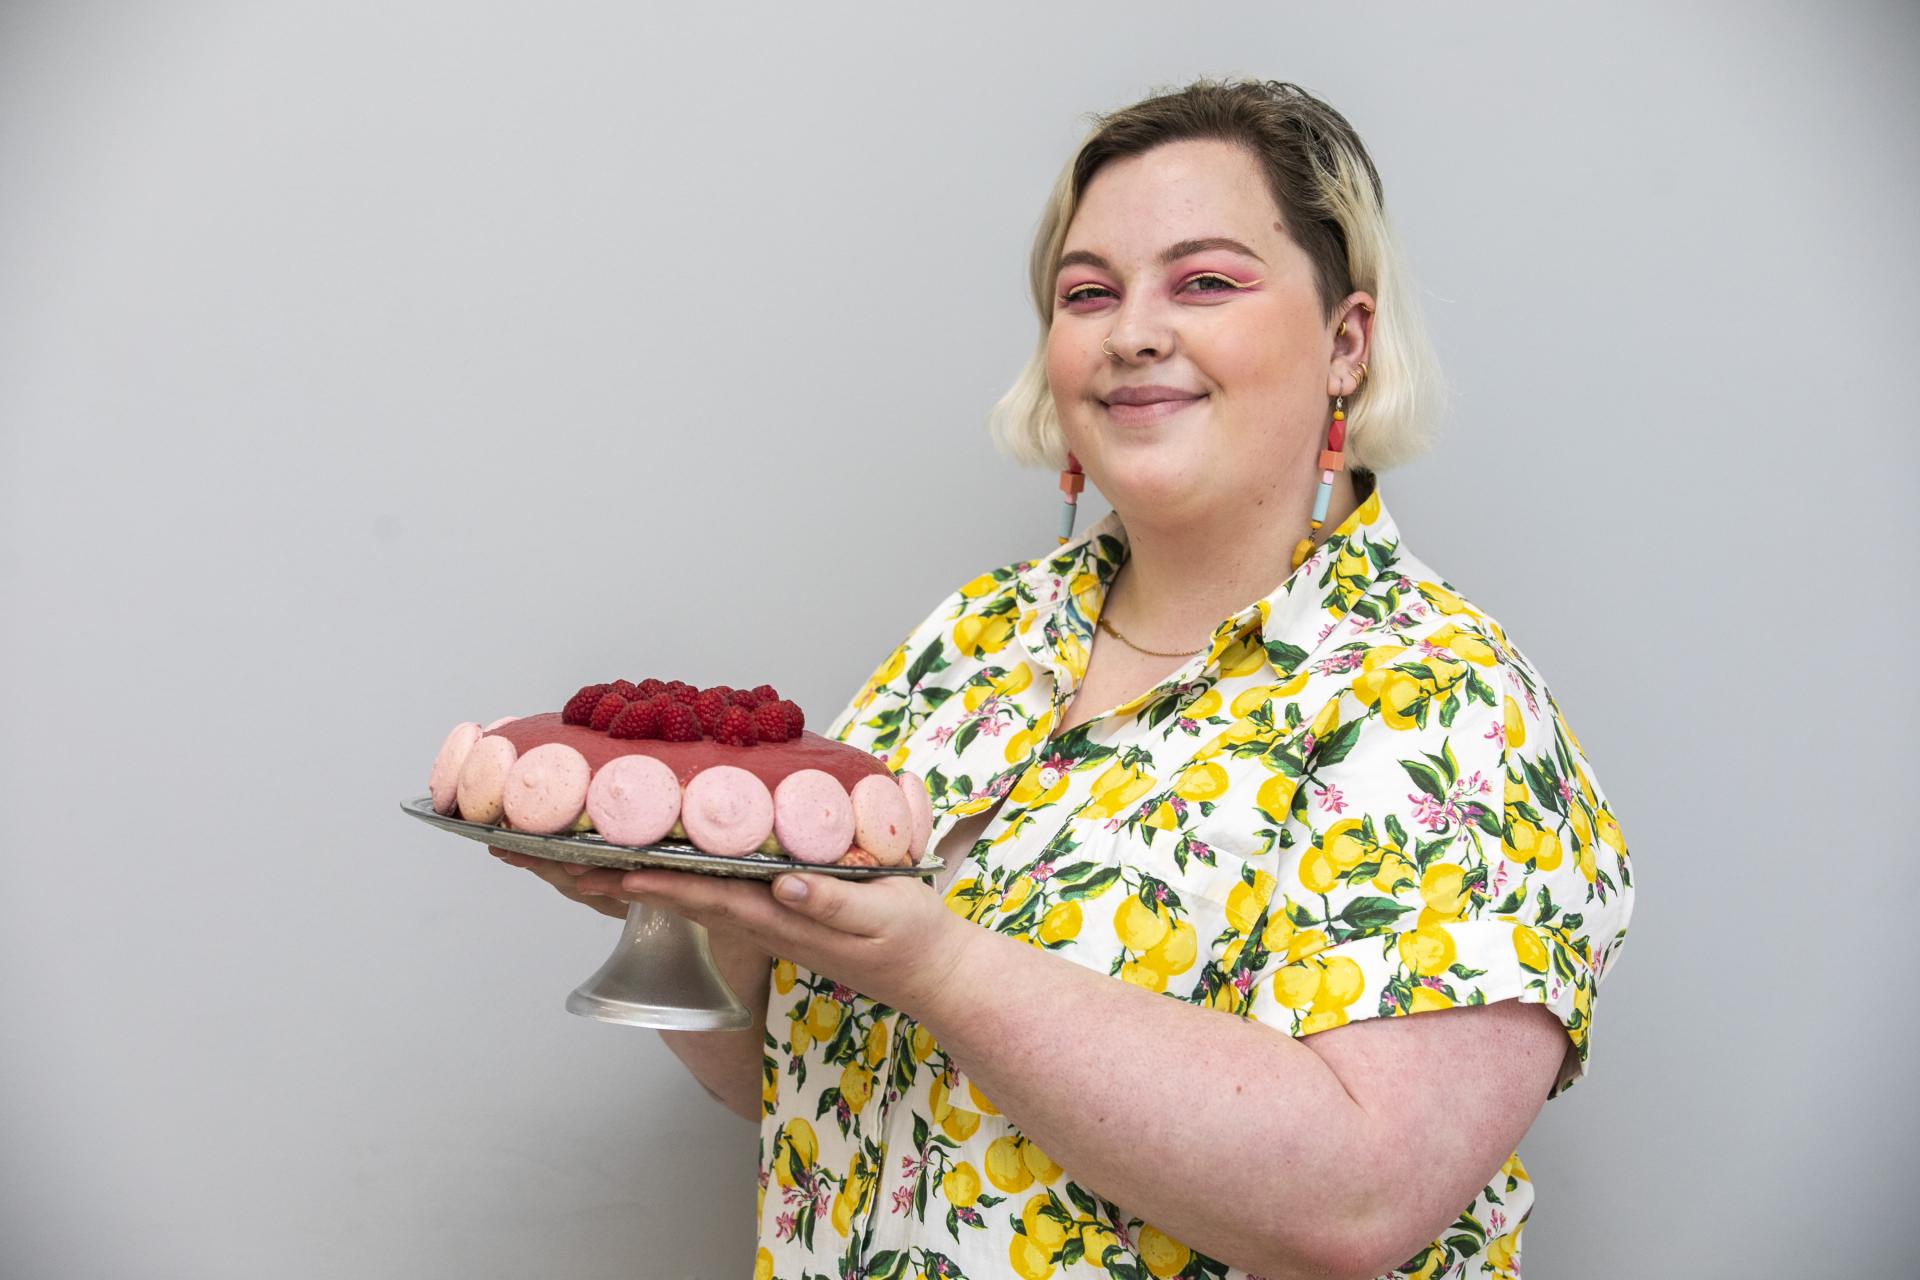 Shows Hazel with her Raspberry and Honey Summer Torte for DCU Bake Off For Barretstown